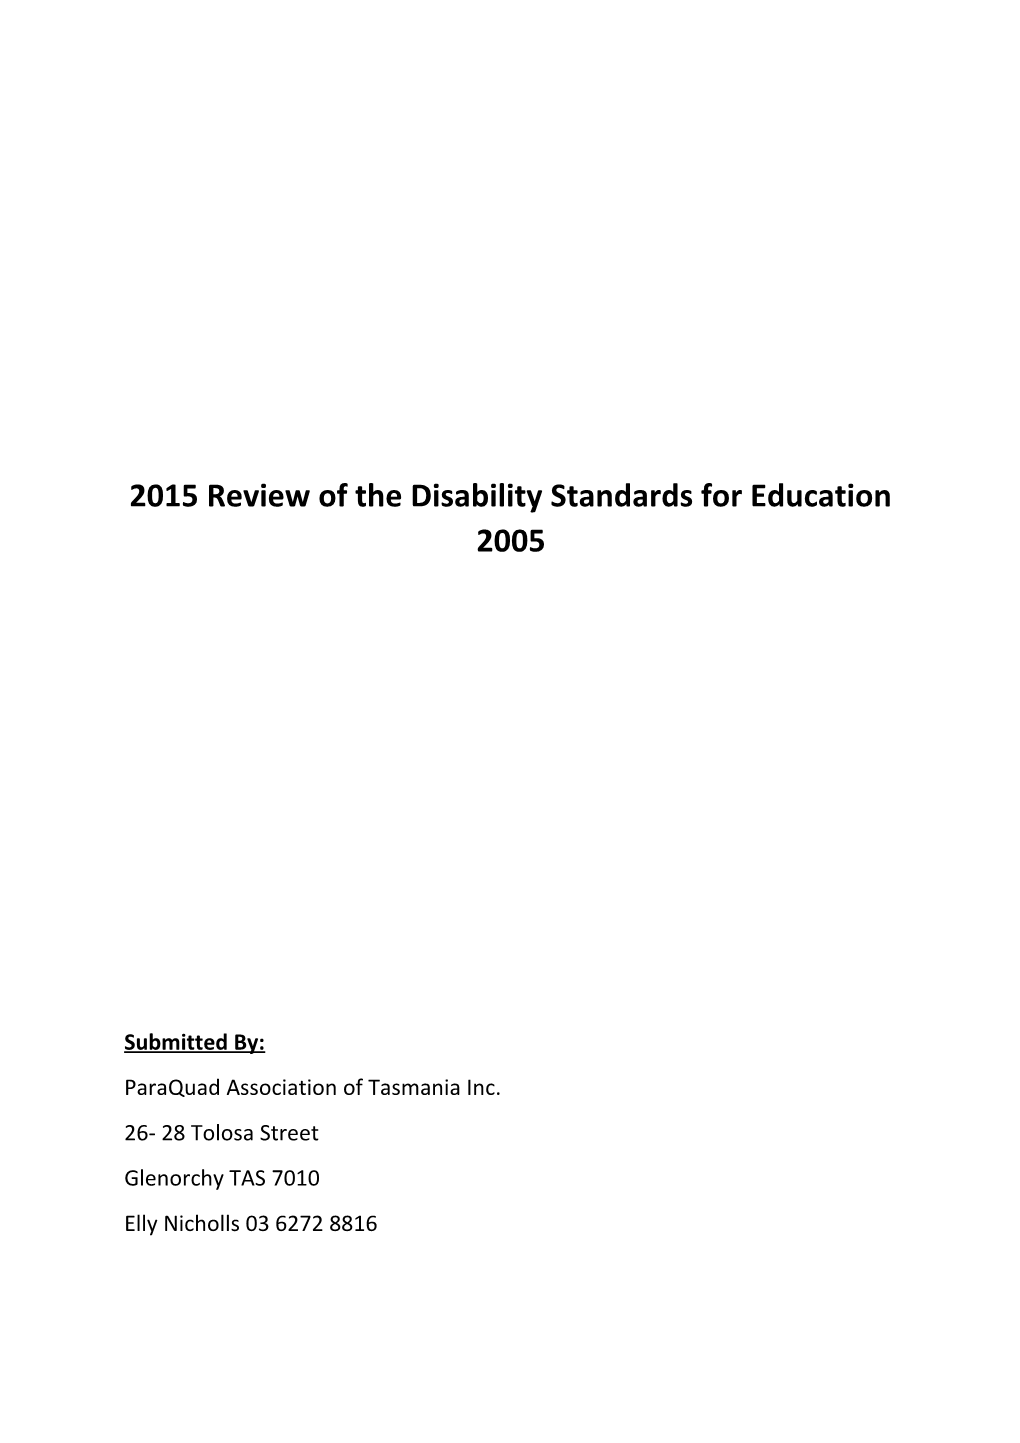 2015 Review of the Disability Standards for Education 2005